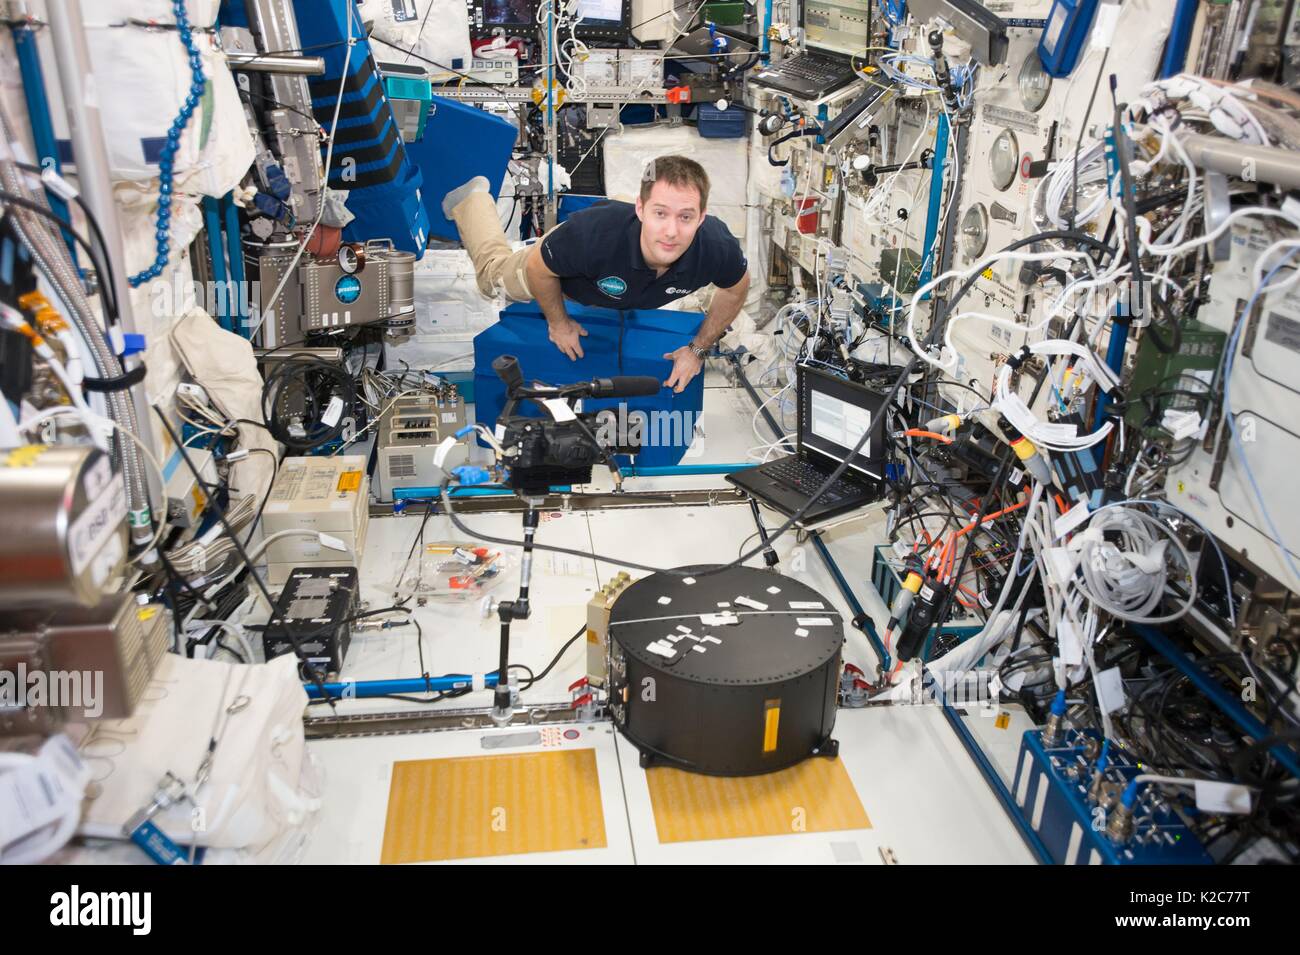 NASA International Space Station Expedition 51 prime crew member French astronaut Thomas Pesquet of the European Space Agency participates in a Fluidics experiment inside the Columbus Laboratory Module May 2, 2017 in Earth orbit. Stock Photo